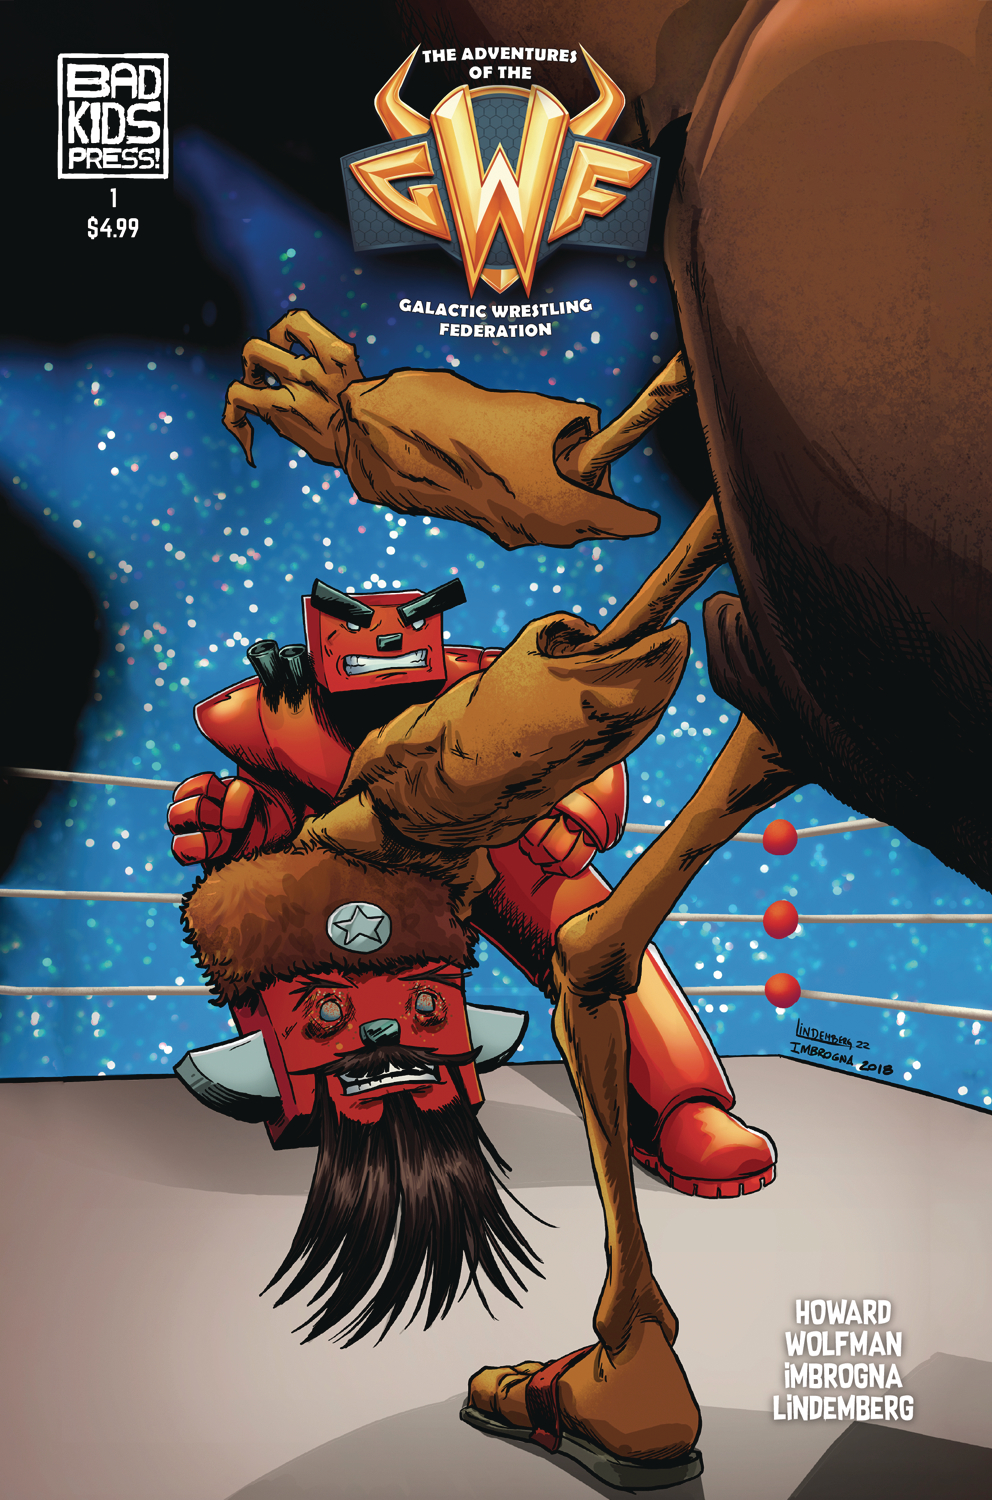 Adventures of the Galactic Wrestling Federation #1 Cover A Imbrogna